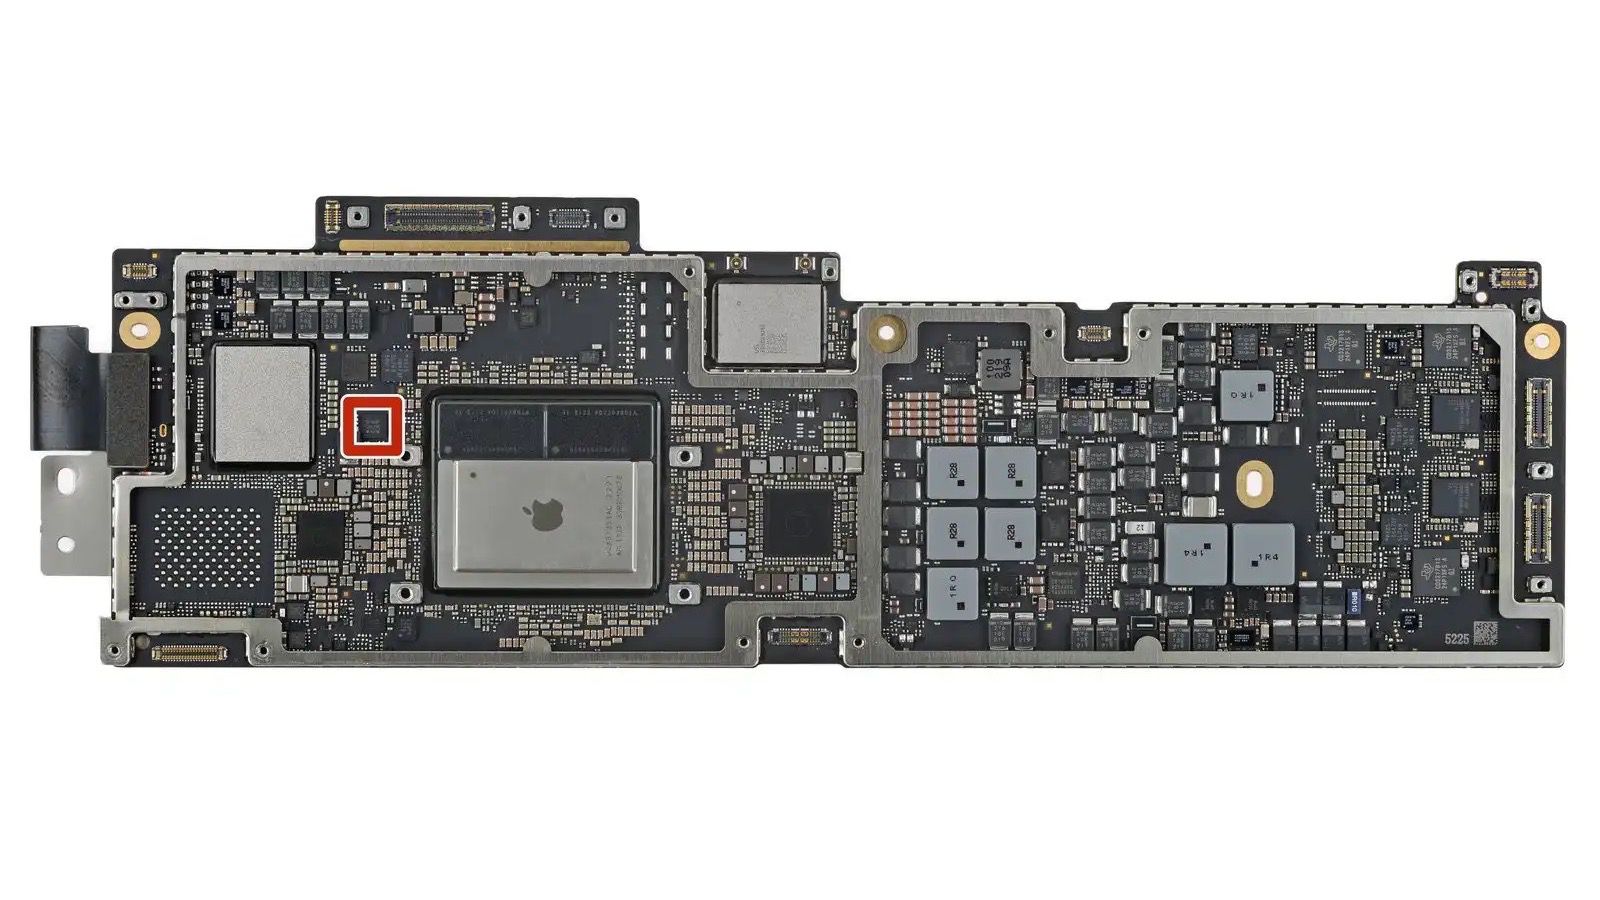 M2 MacBook Air is First Apple Silicon Mac With Constructed-in Accelerometer